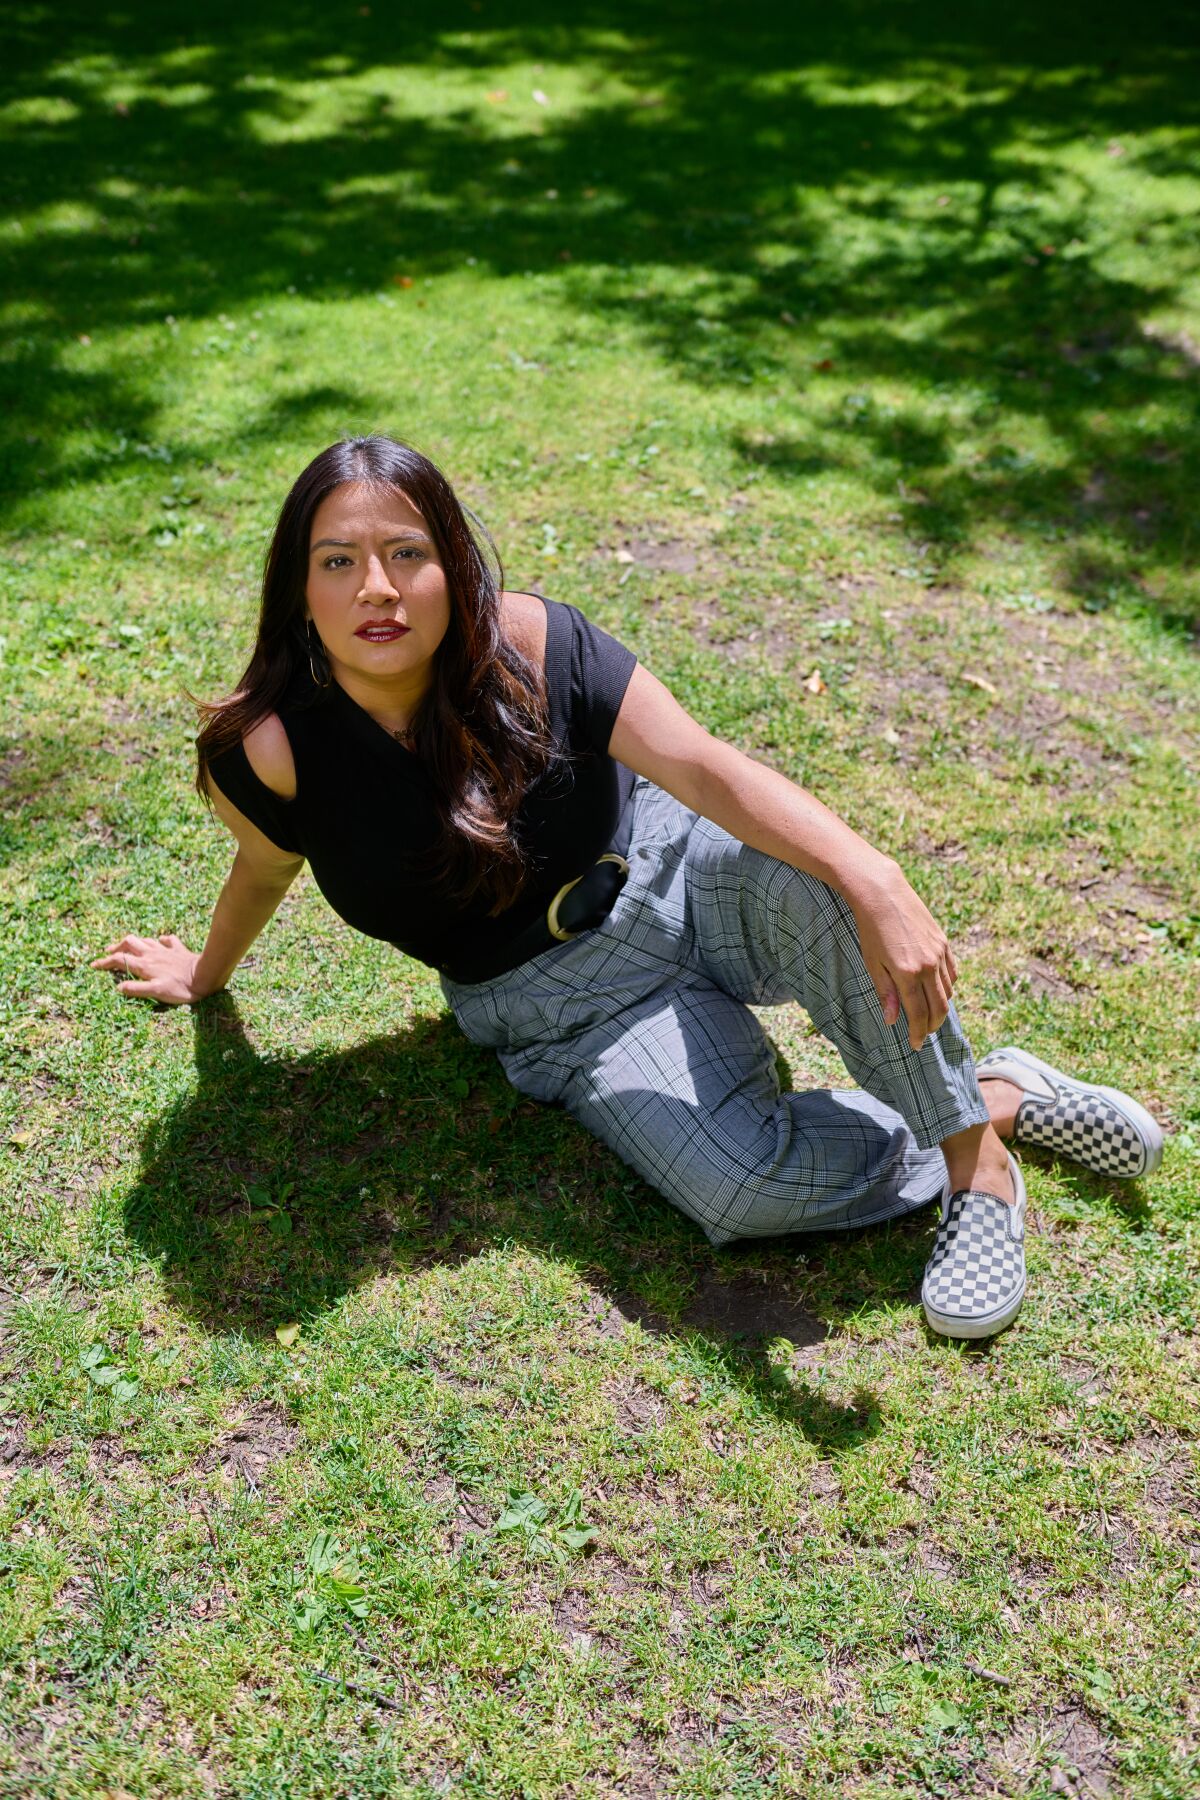 Comedian Cristela Alonzo sits on the grass at a park.